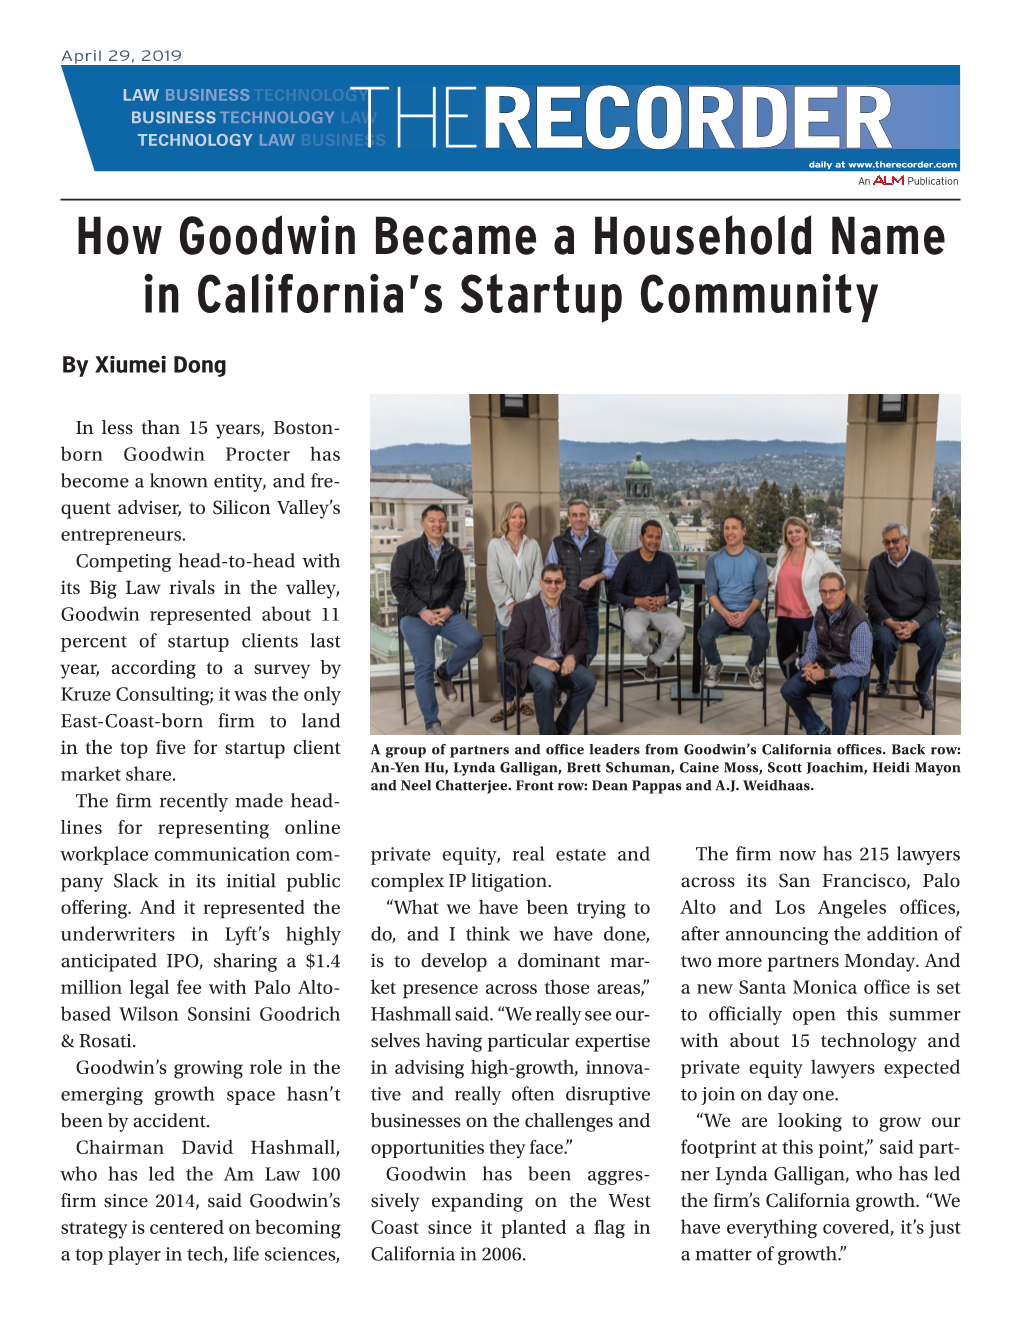 RECORDER Daily at How Goodwin Became a Household Name in California’S Startup Community